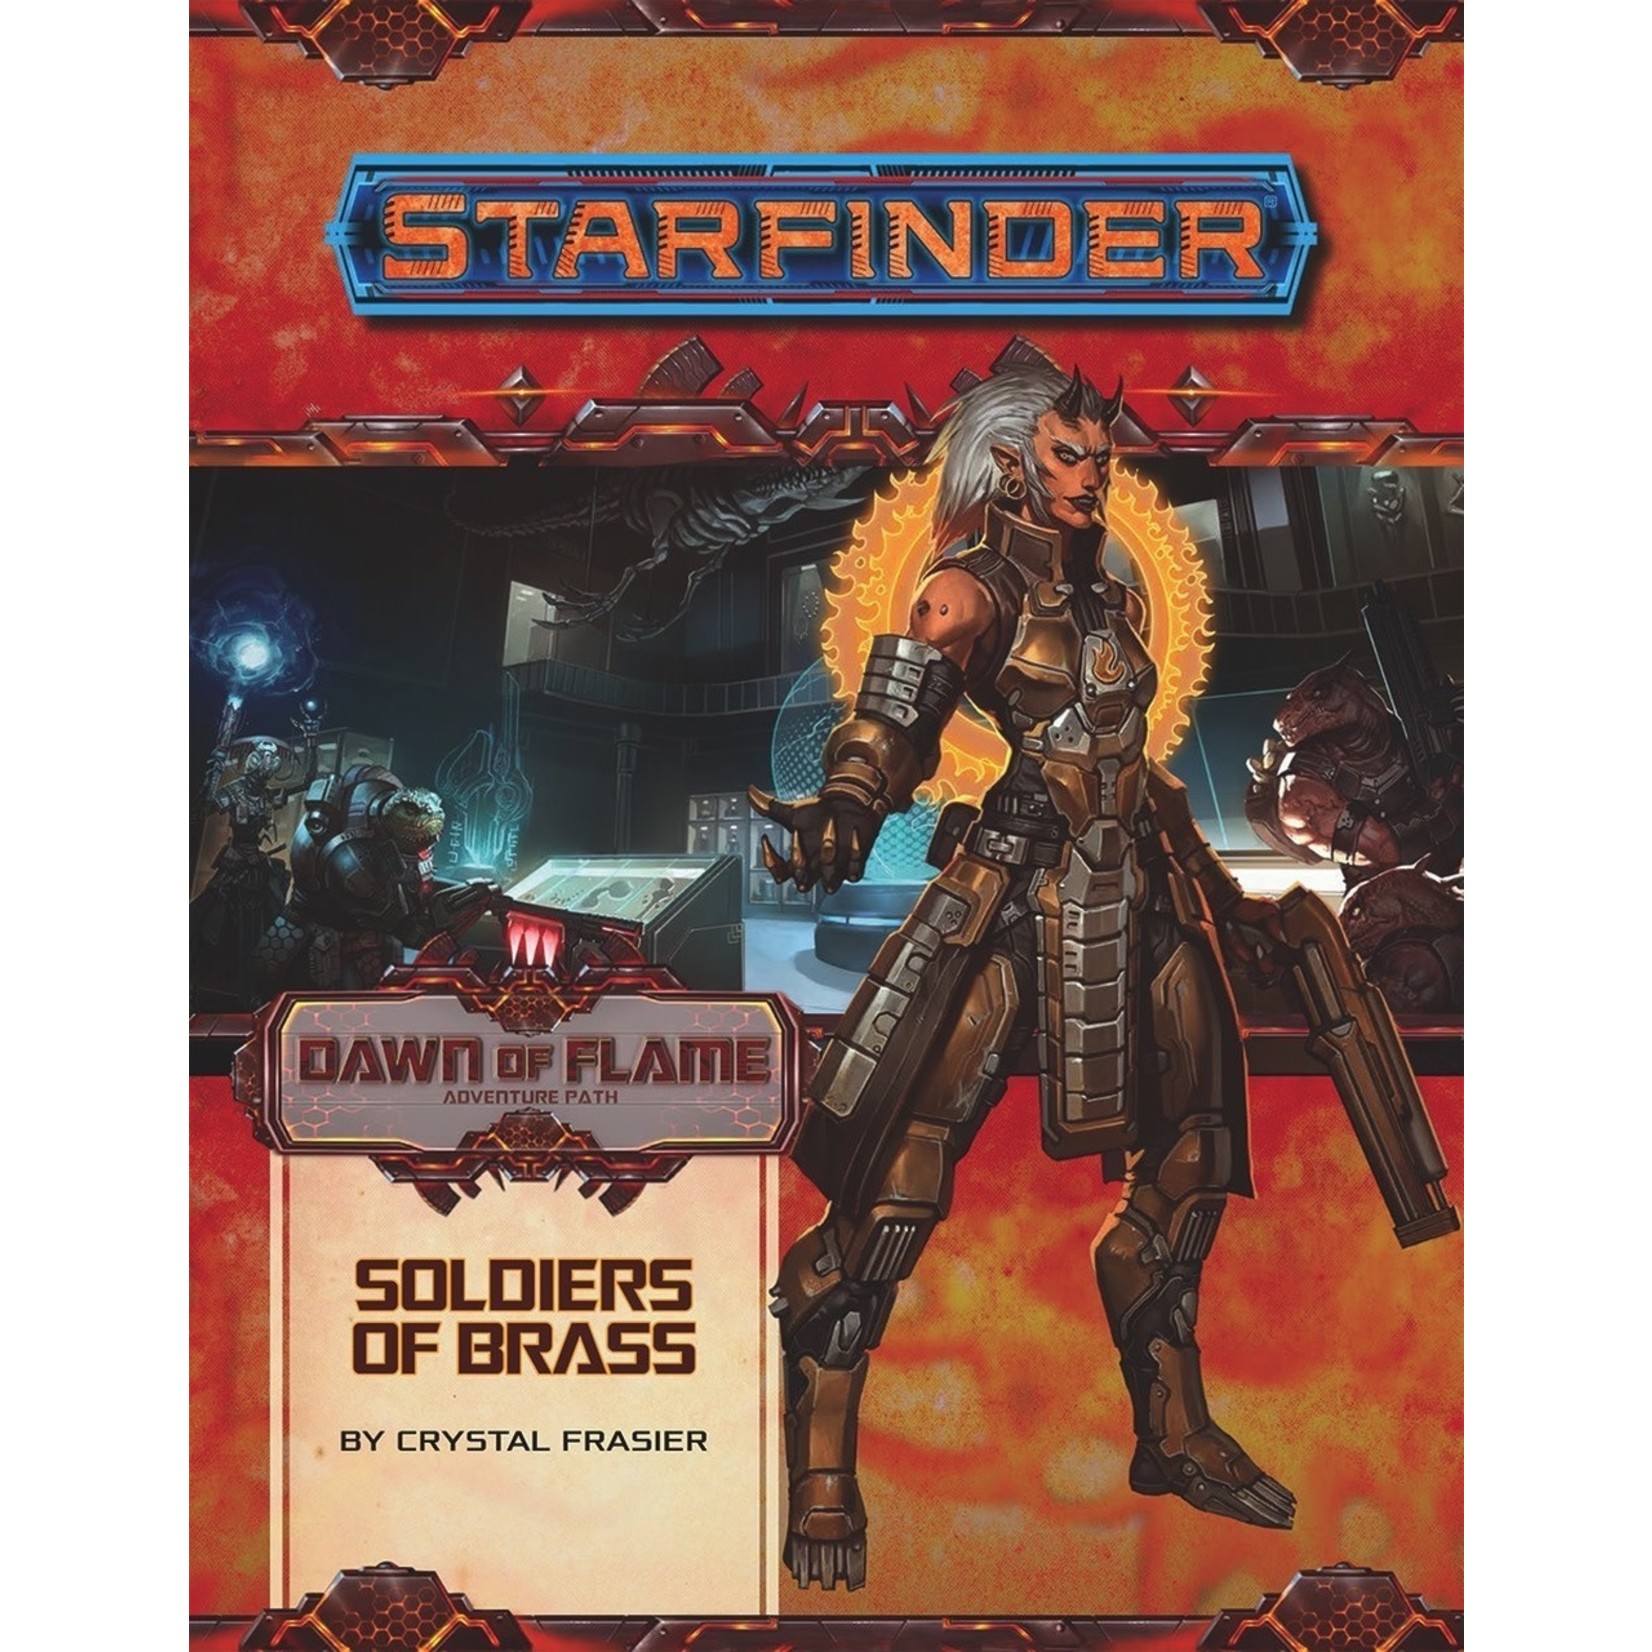 Paizo Starfinder RPG: Adventure Path - Dawn of Flame 2 - Soldiers of Brass